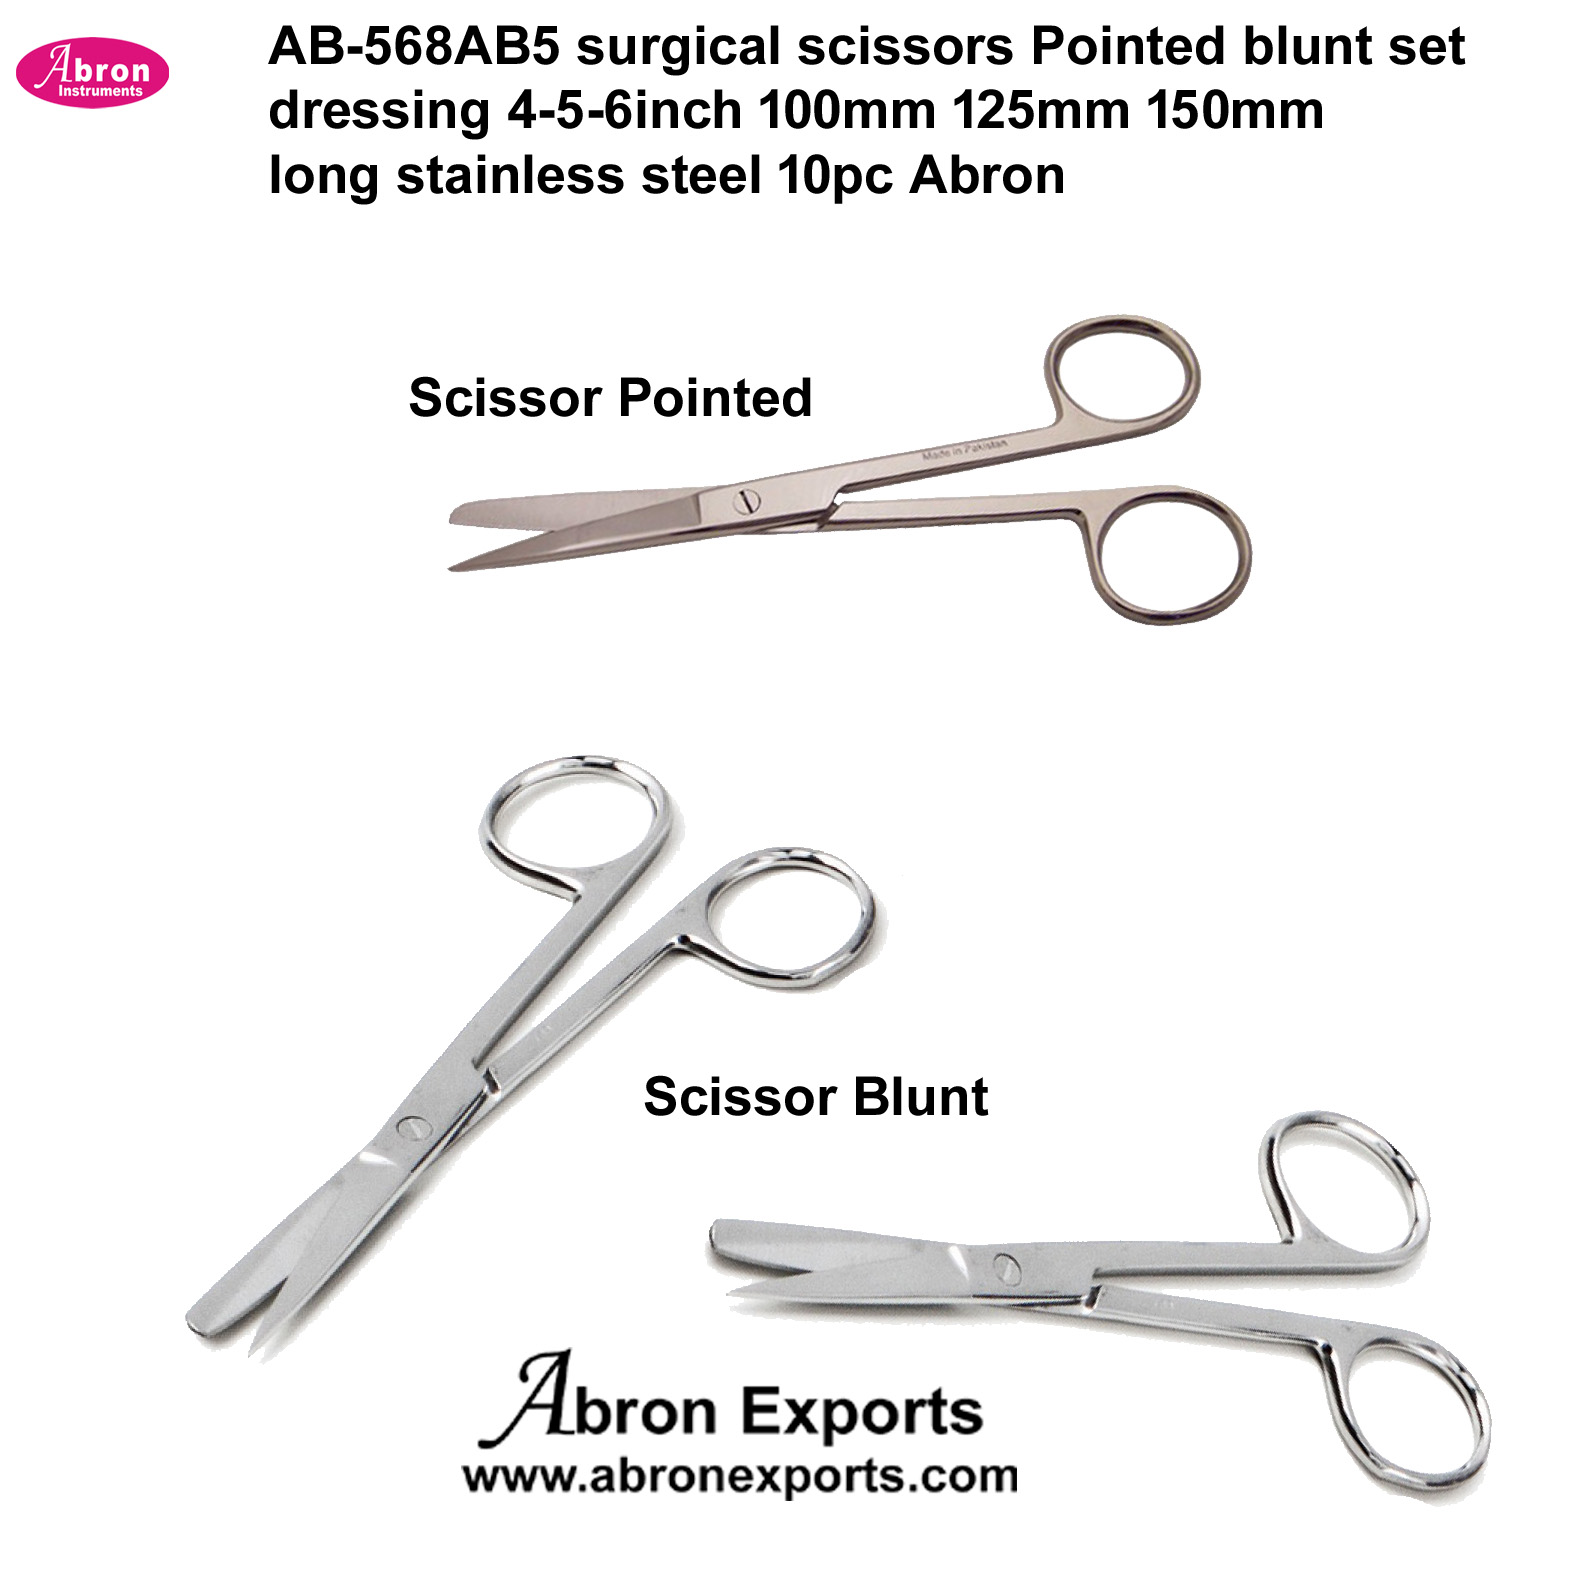 surgical scissors Pointed blunt set dressing 4-5-6inch 100mm 125mm 150mm long stainless steel 10pc Abron AB-568AB5 